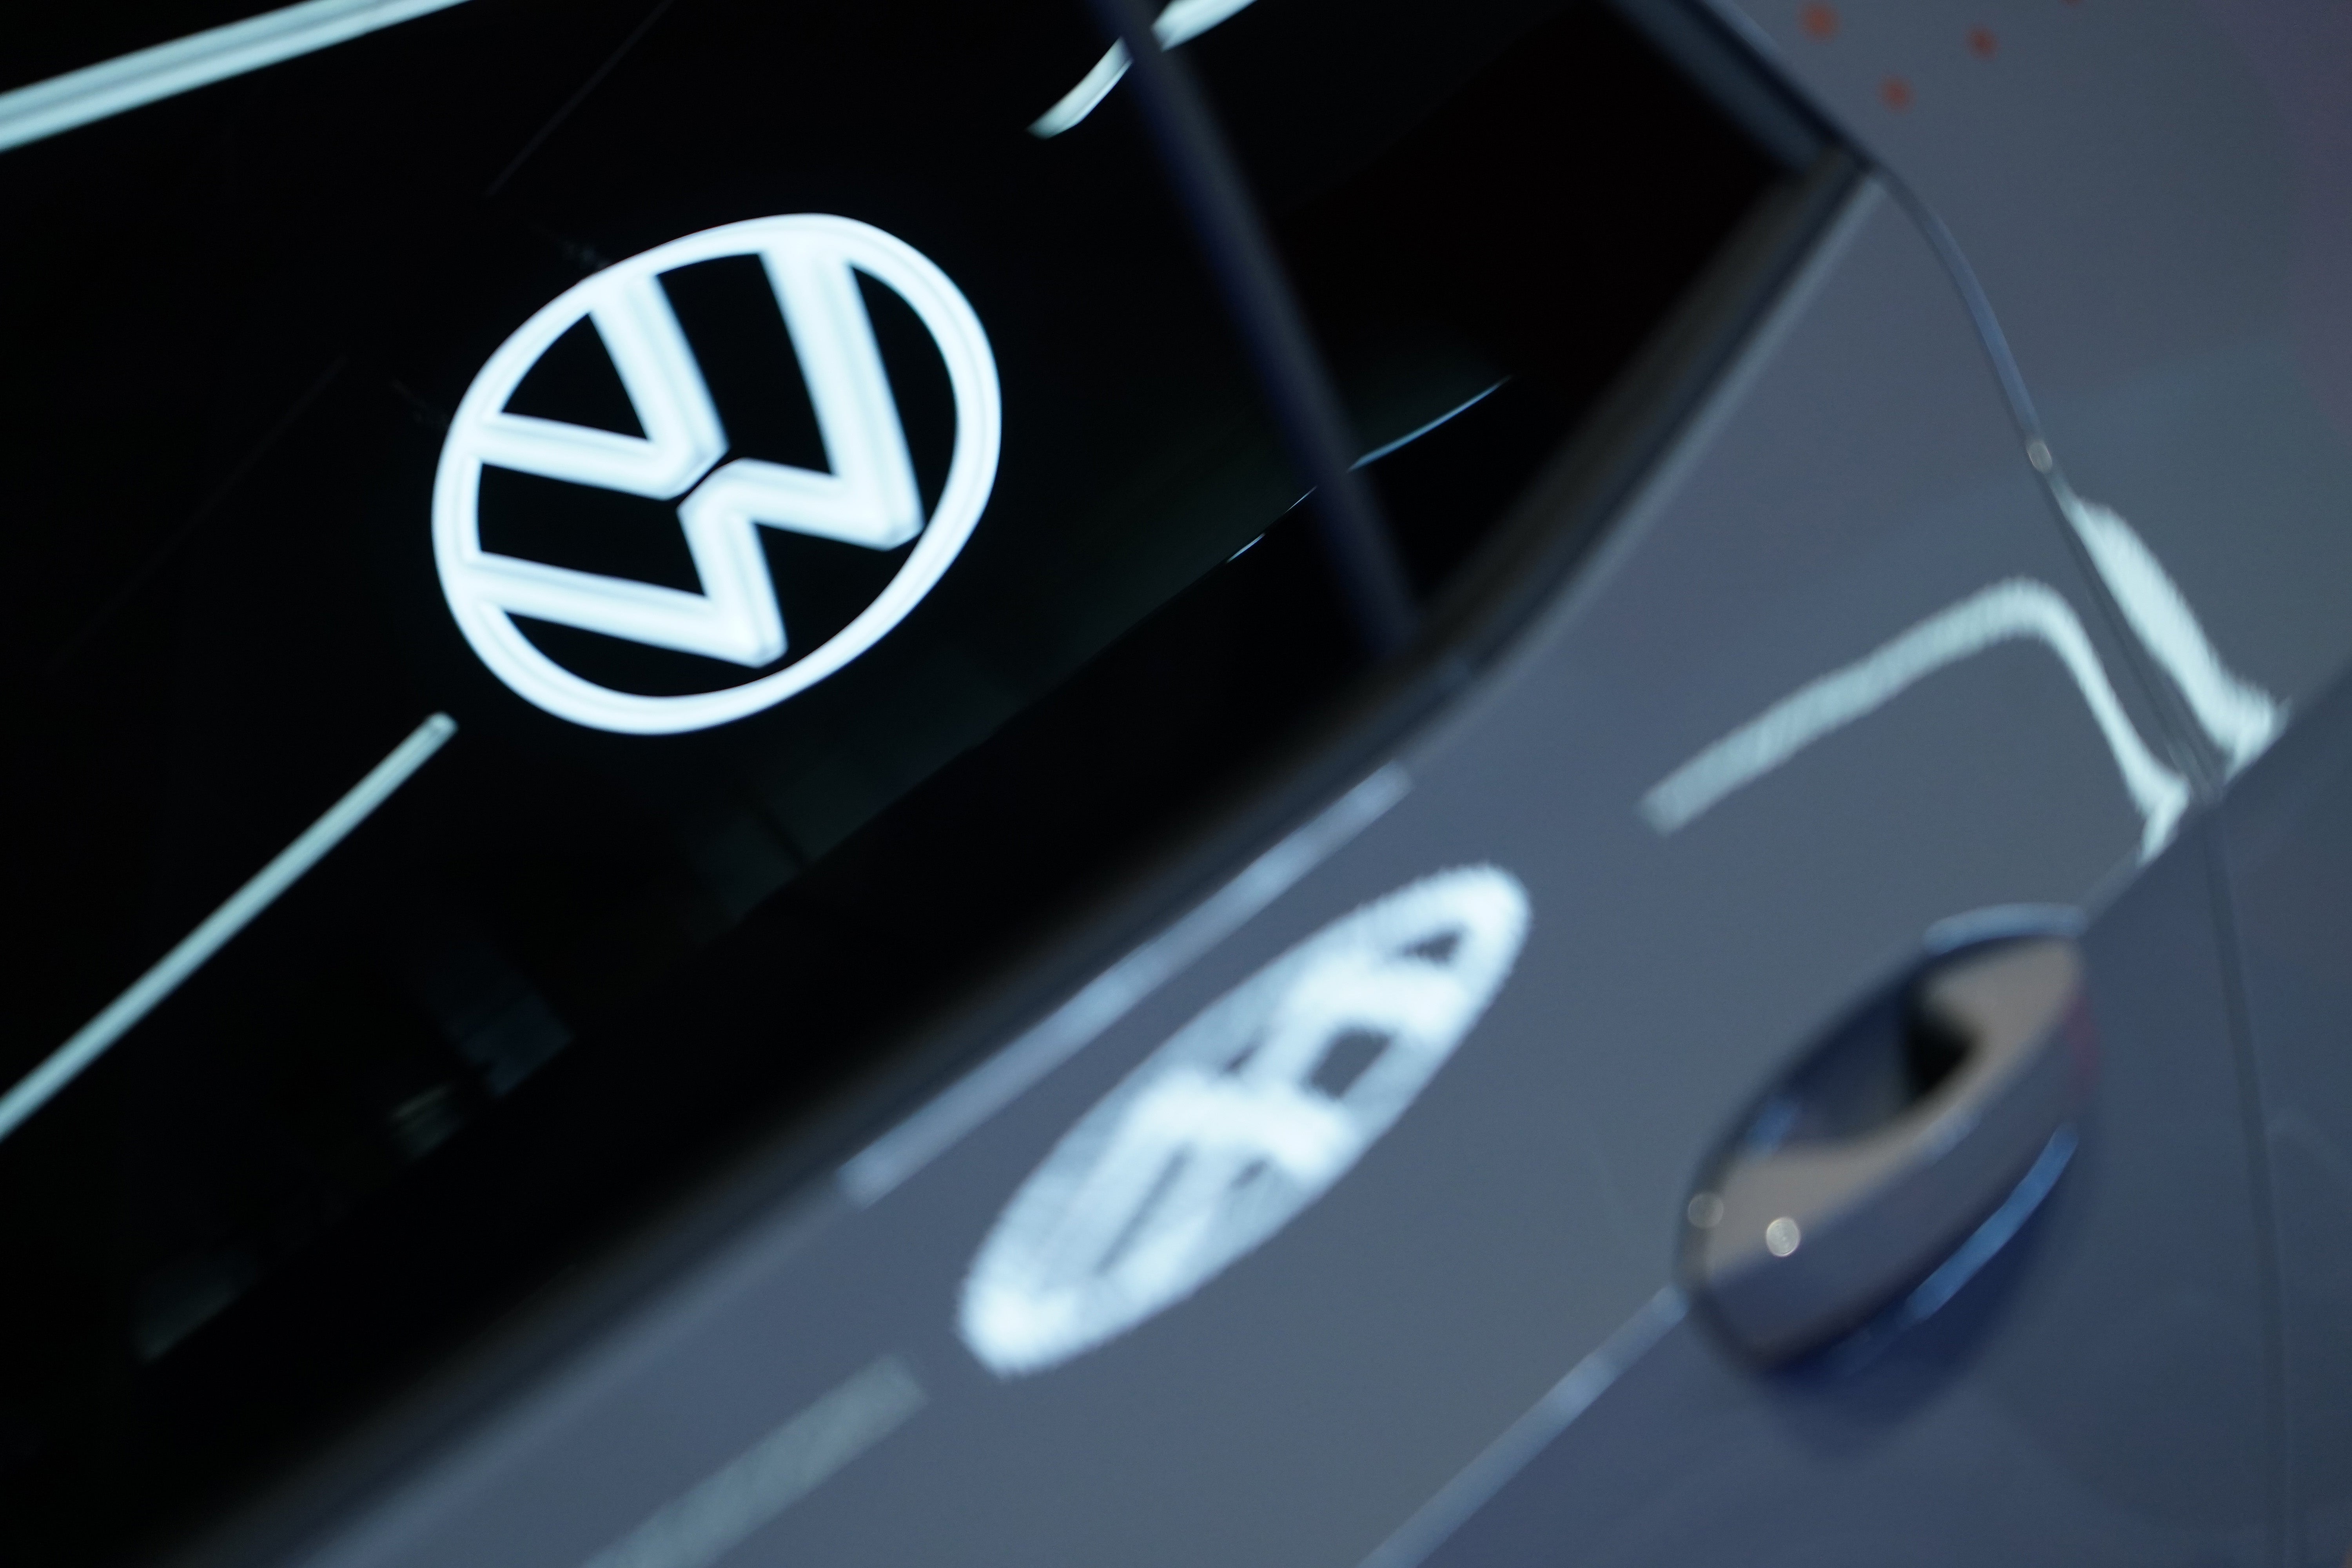 Volkswagen Group has been exploring a possible Formula 1 entry for some time.